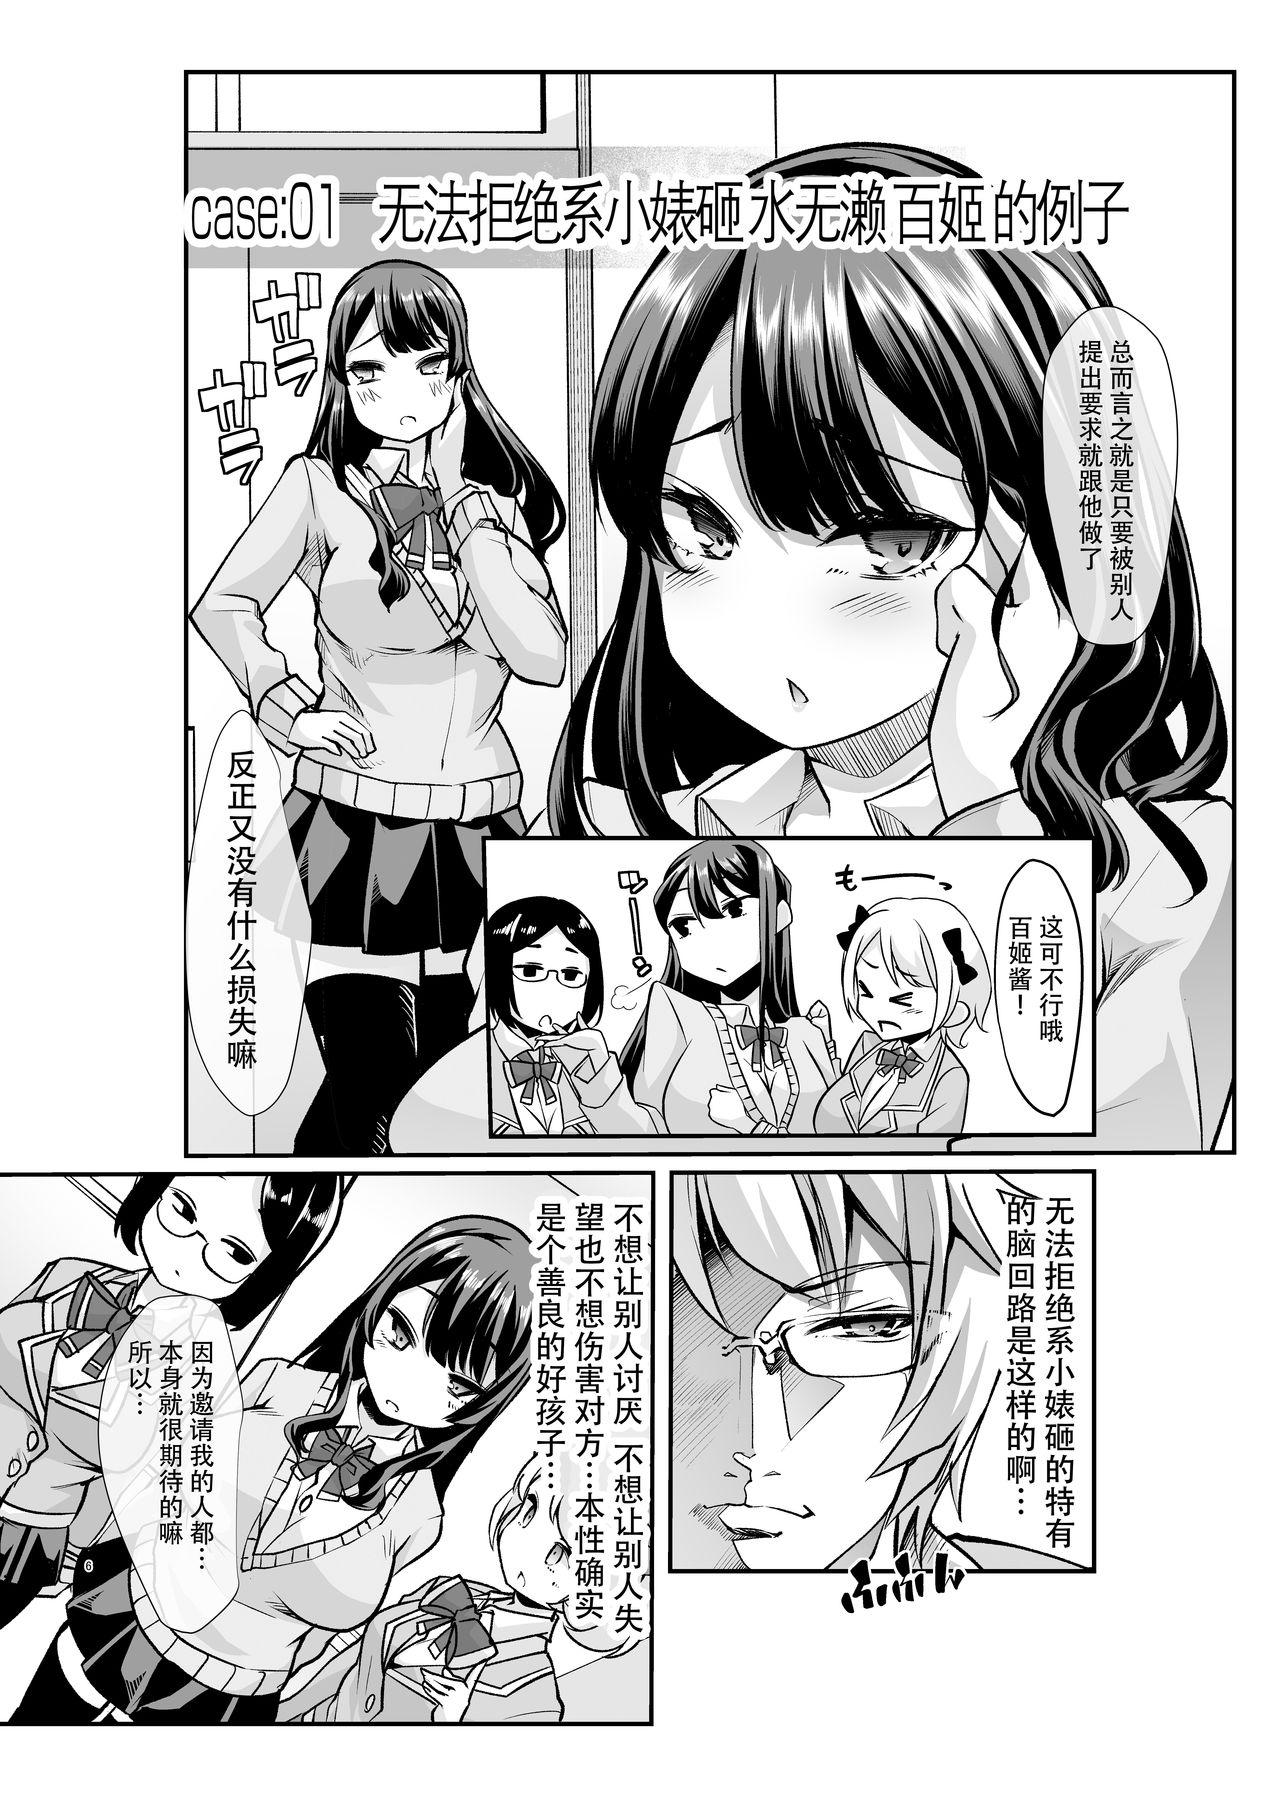 Twinks Any girl can do it! Bitch Zukan-I could have a harem if I solved various problems of Saseko～ - Original Stockings - Page 6